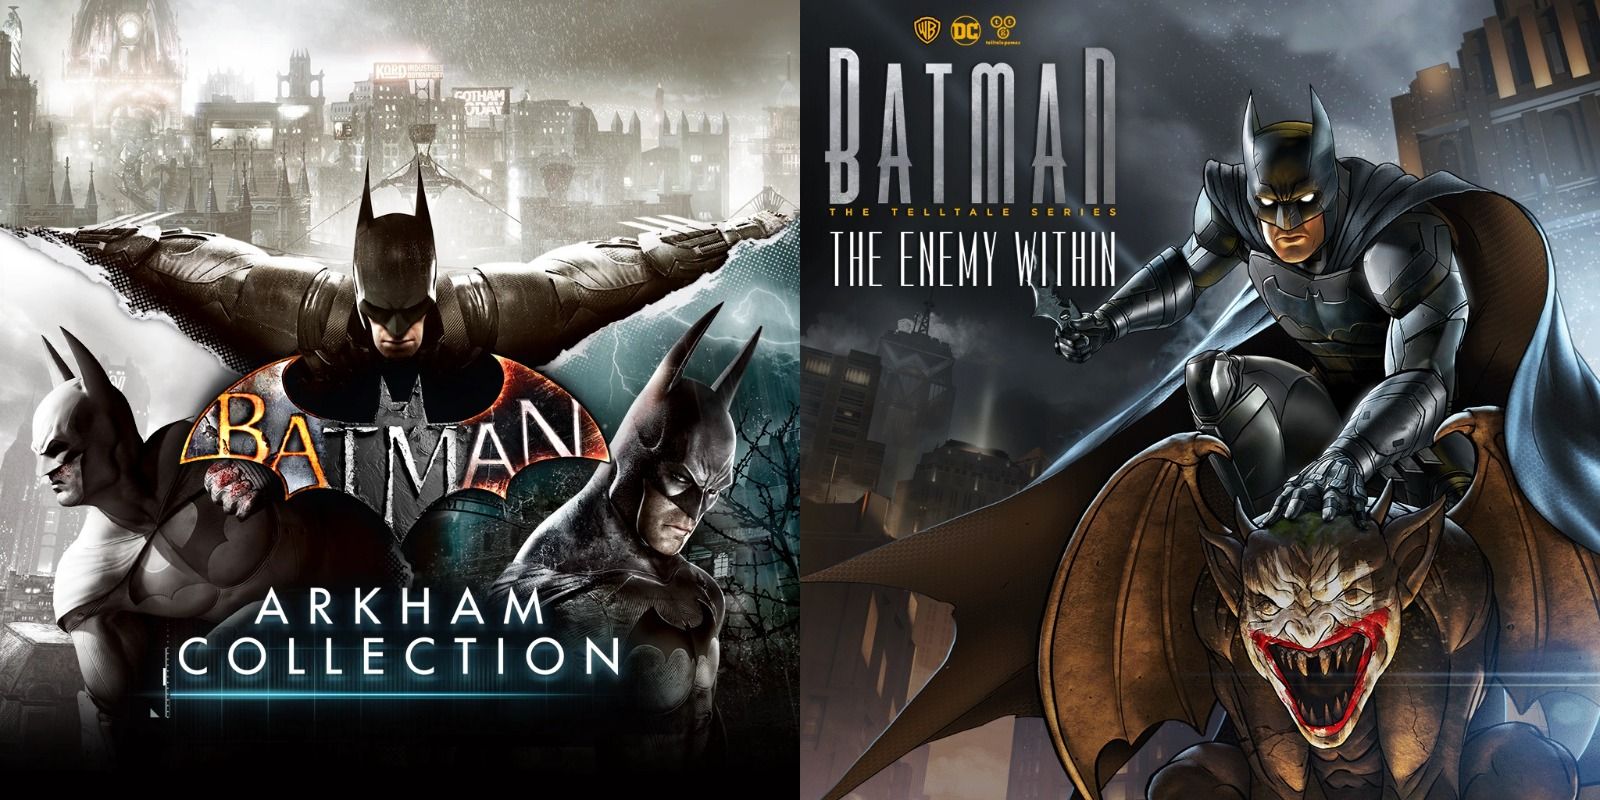 The Arkham Collection and Batman: The Enemy Within cover art